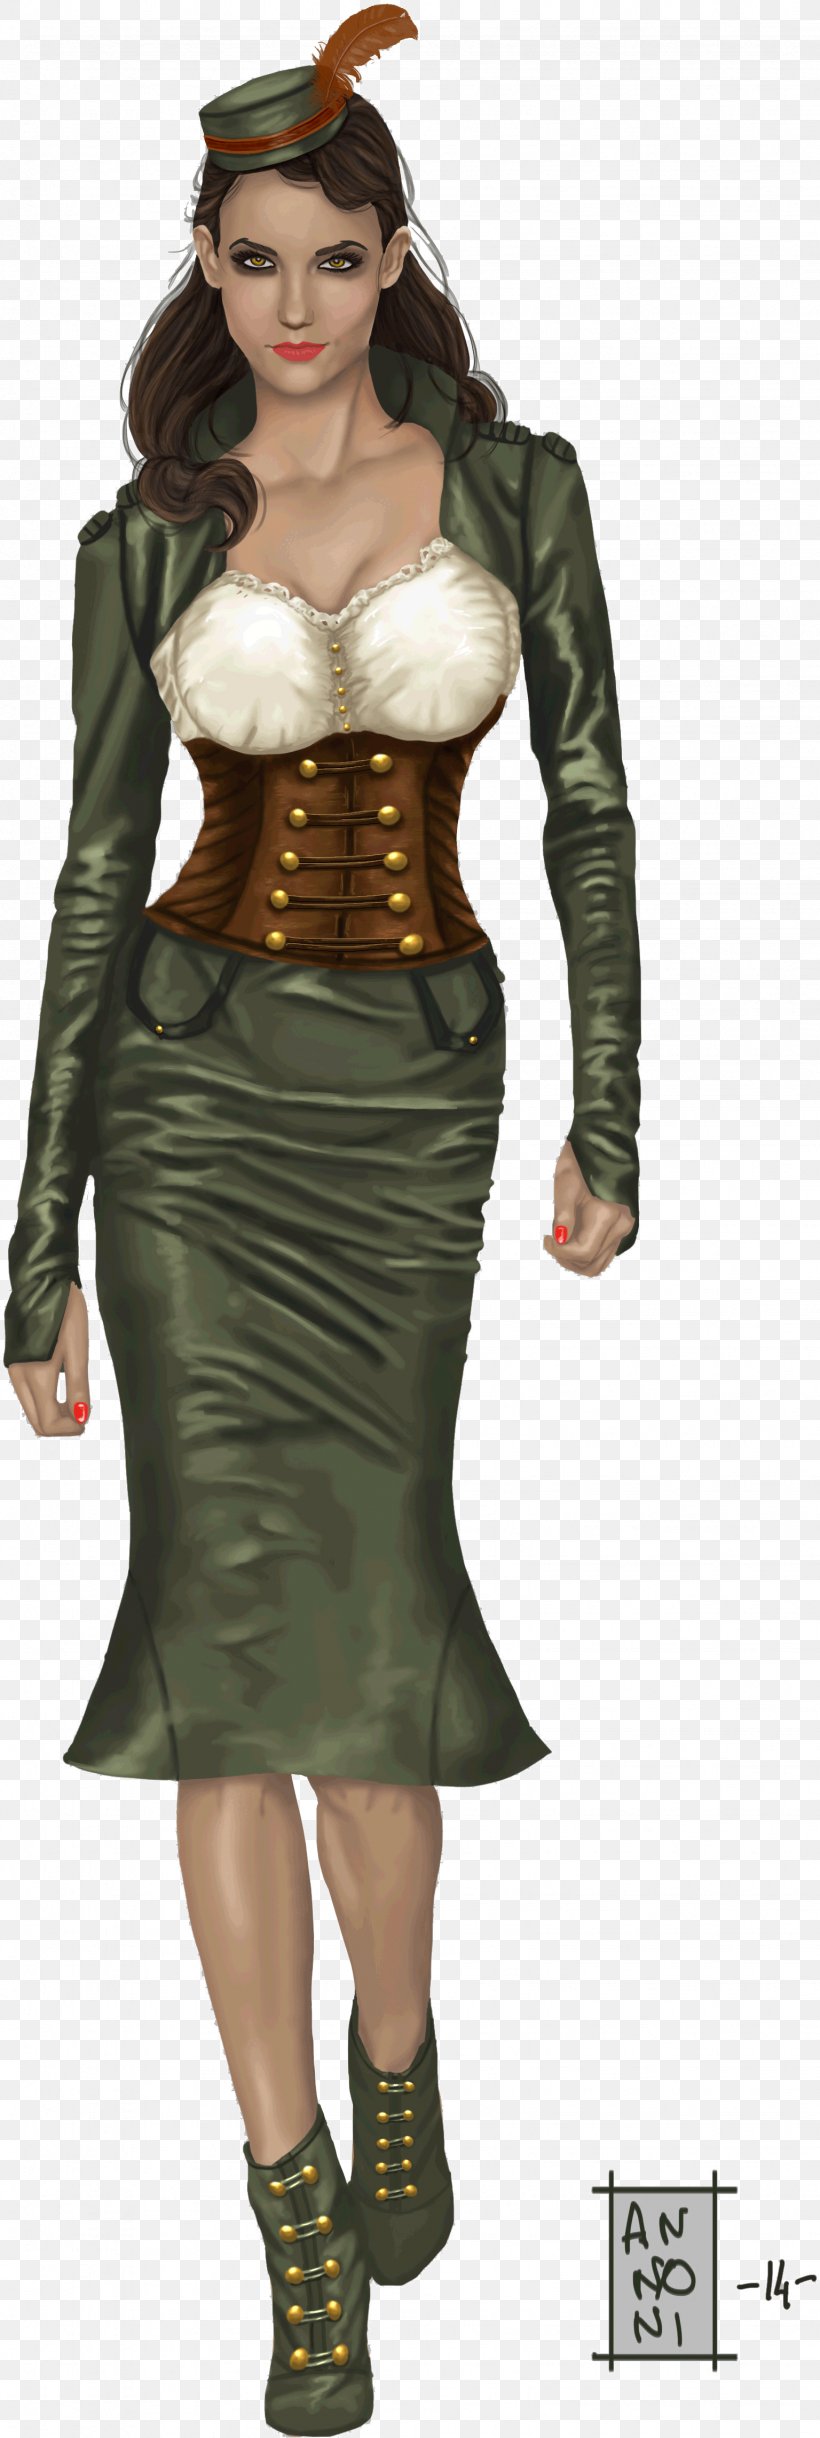 Role-playing Game Dress Woman, PNG, 1536x4568px, Game, Adventure, Blog, Character, Costume Download Free